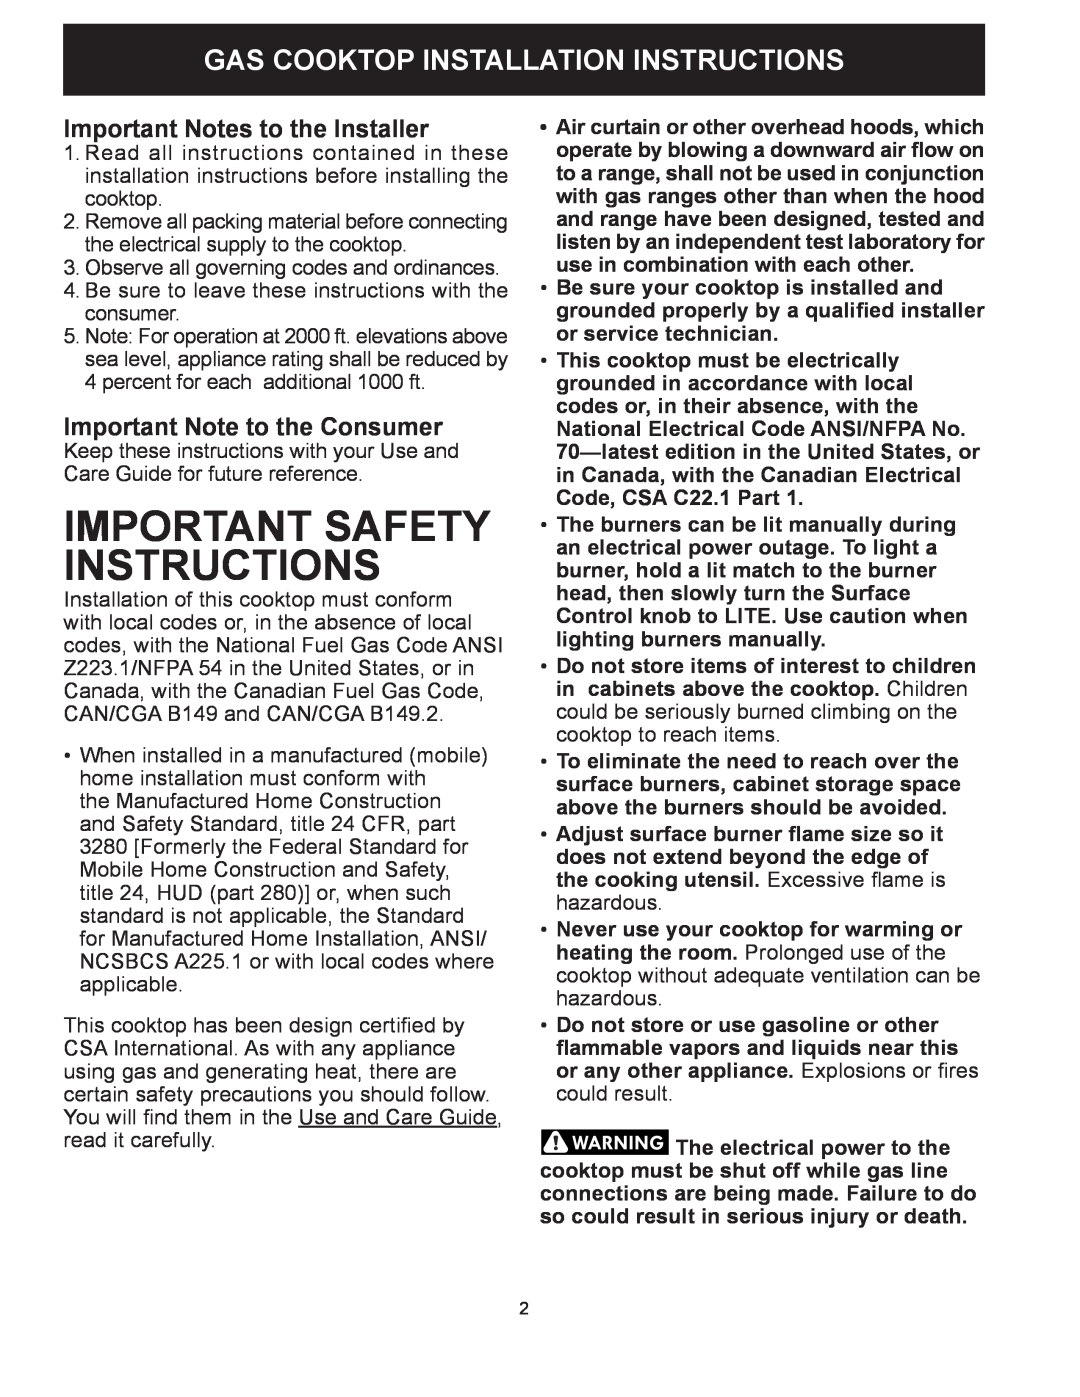 Frigidaire FPGC3087MS Important Notes to the Installer, Important Note to the Consumer, Important Safety Instructions 